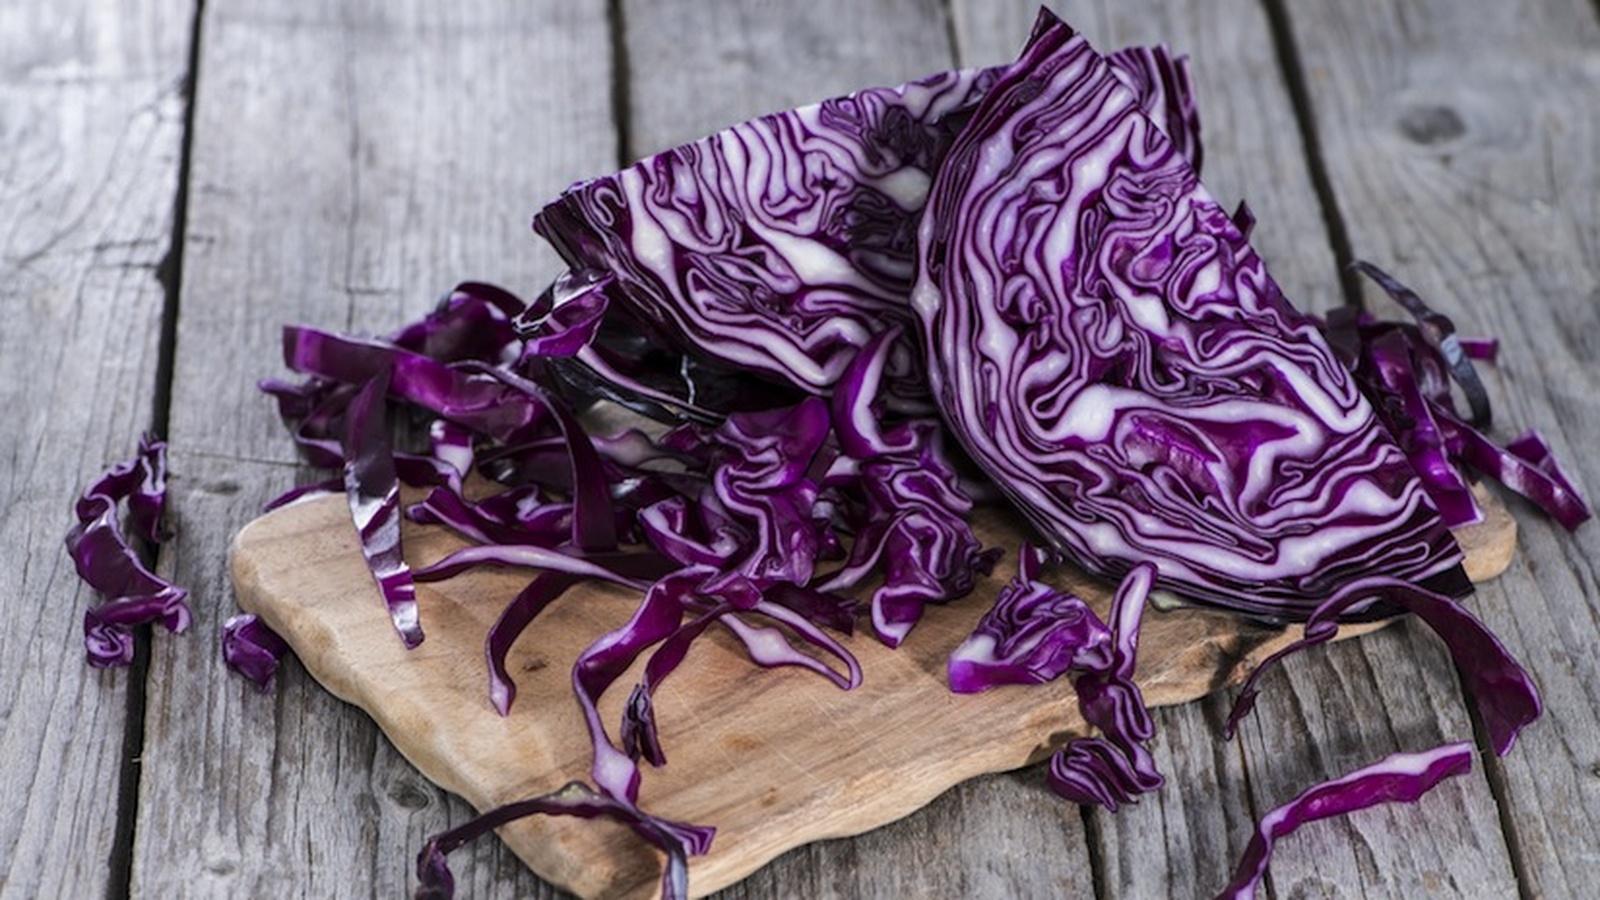 Red Cabbage Found To Contain 36 Anti-Cancer Properties